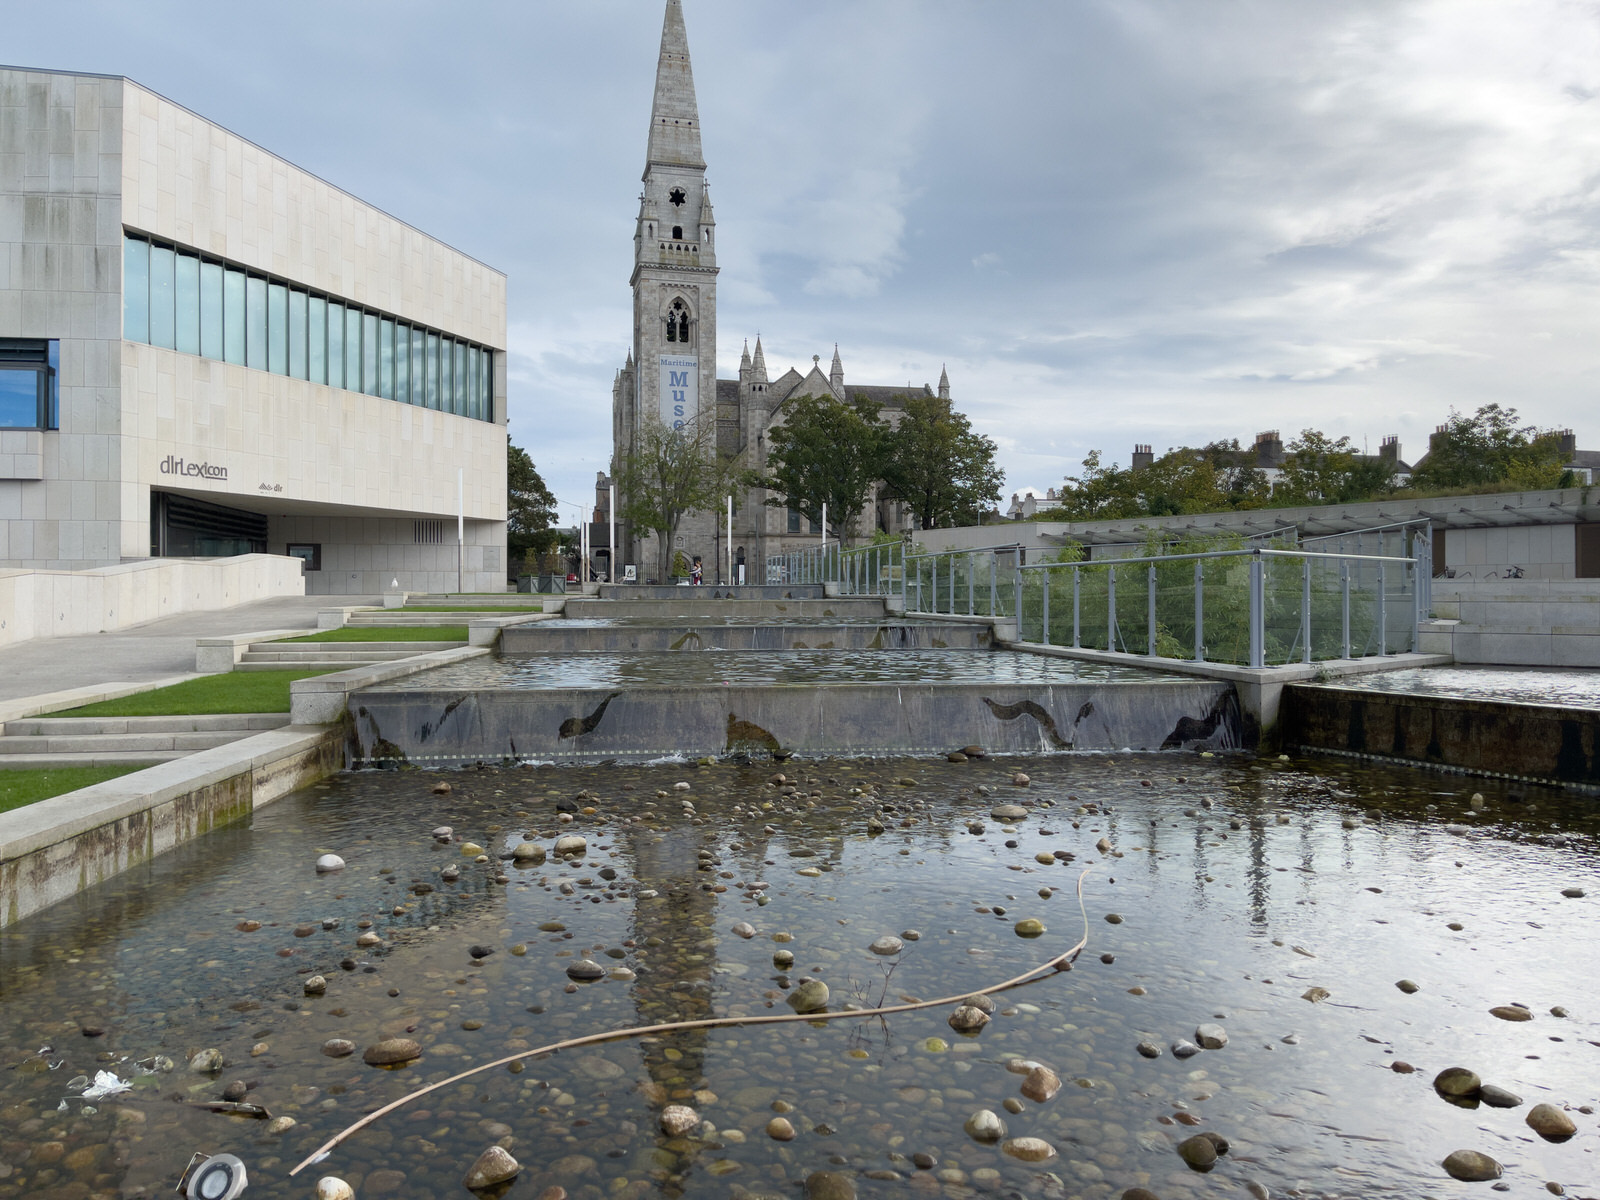 THE WATER FEATURE AT THE DLR LEXICON [MORAN PARK DUN LAOGHAIRE 10 OCTOBER 2023] 010